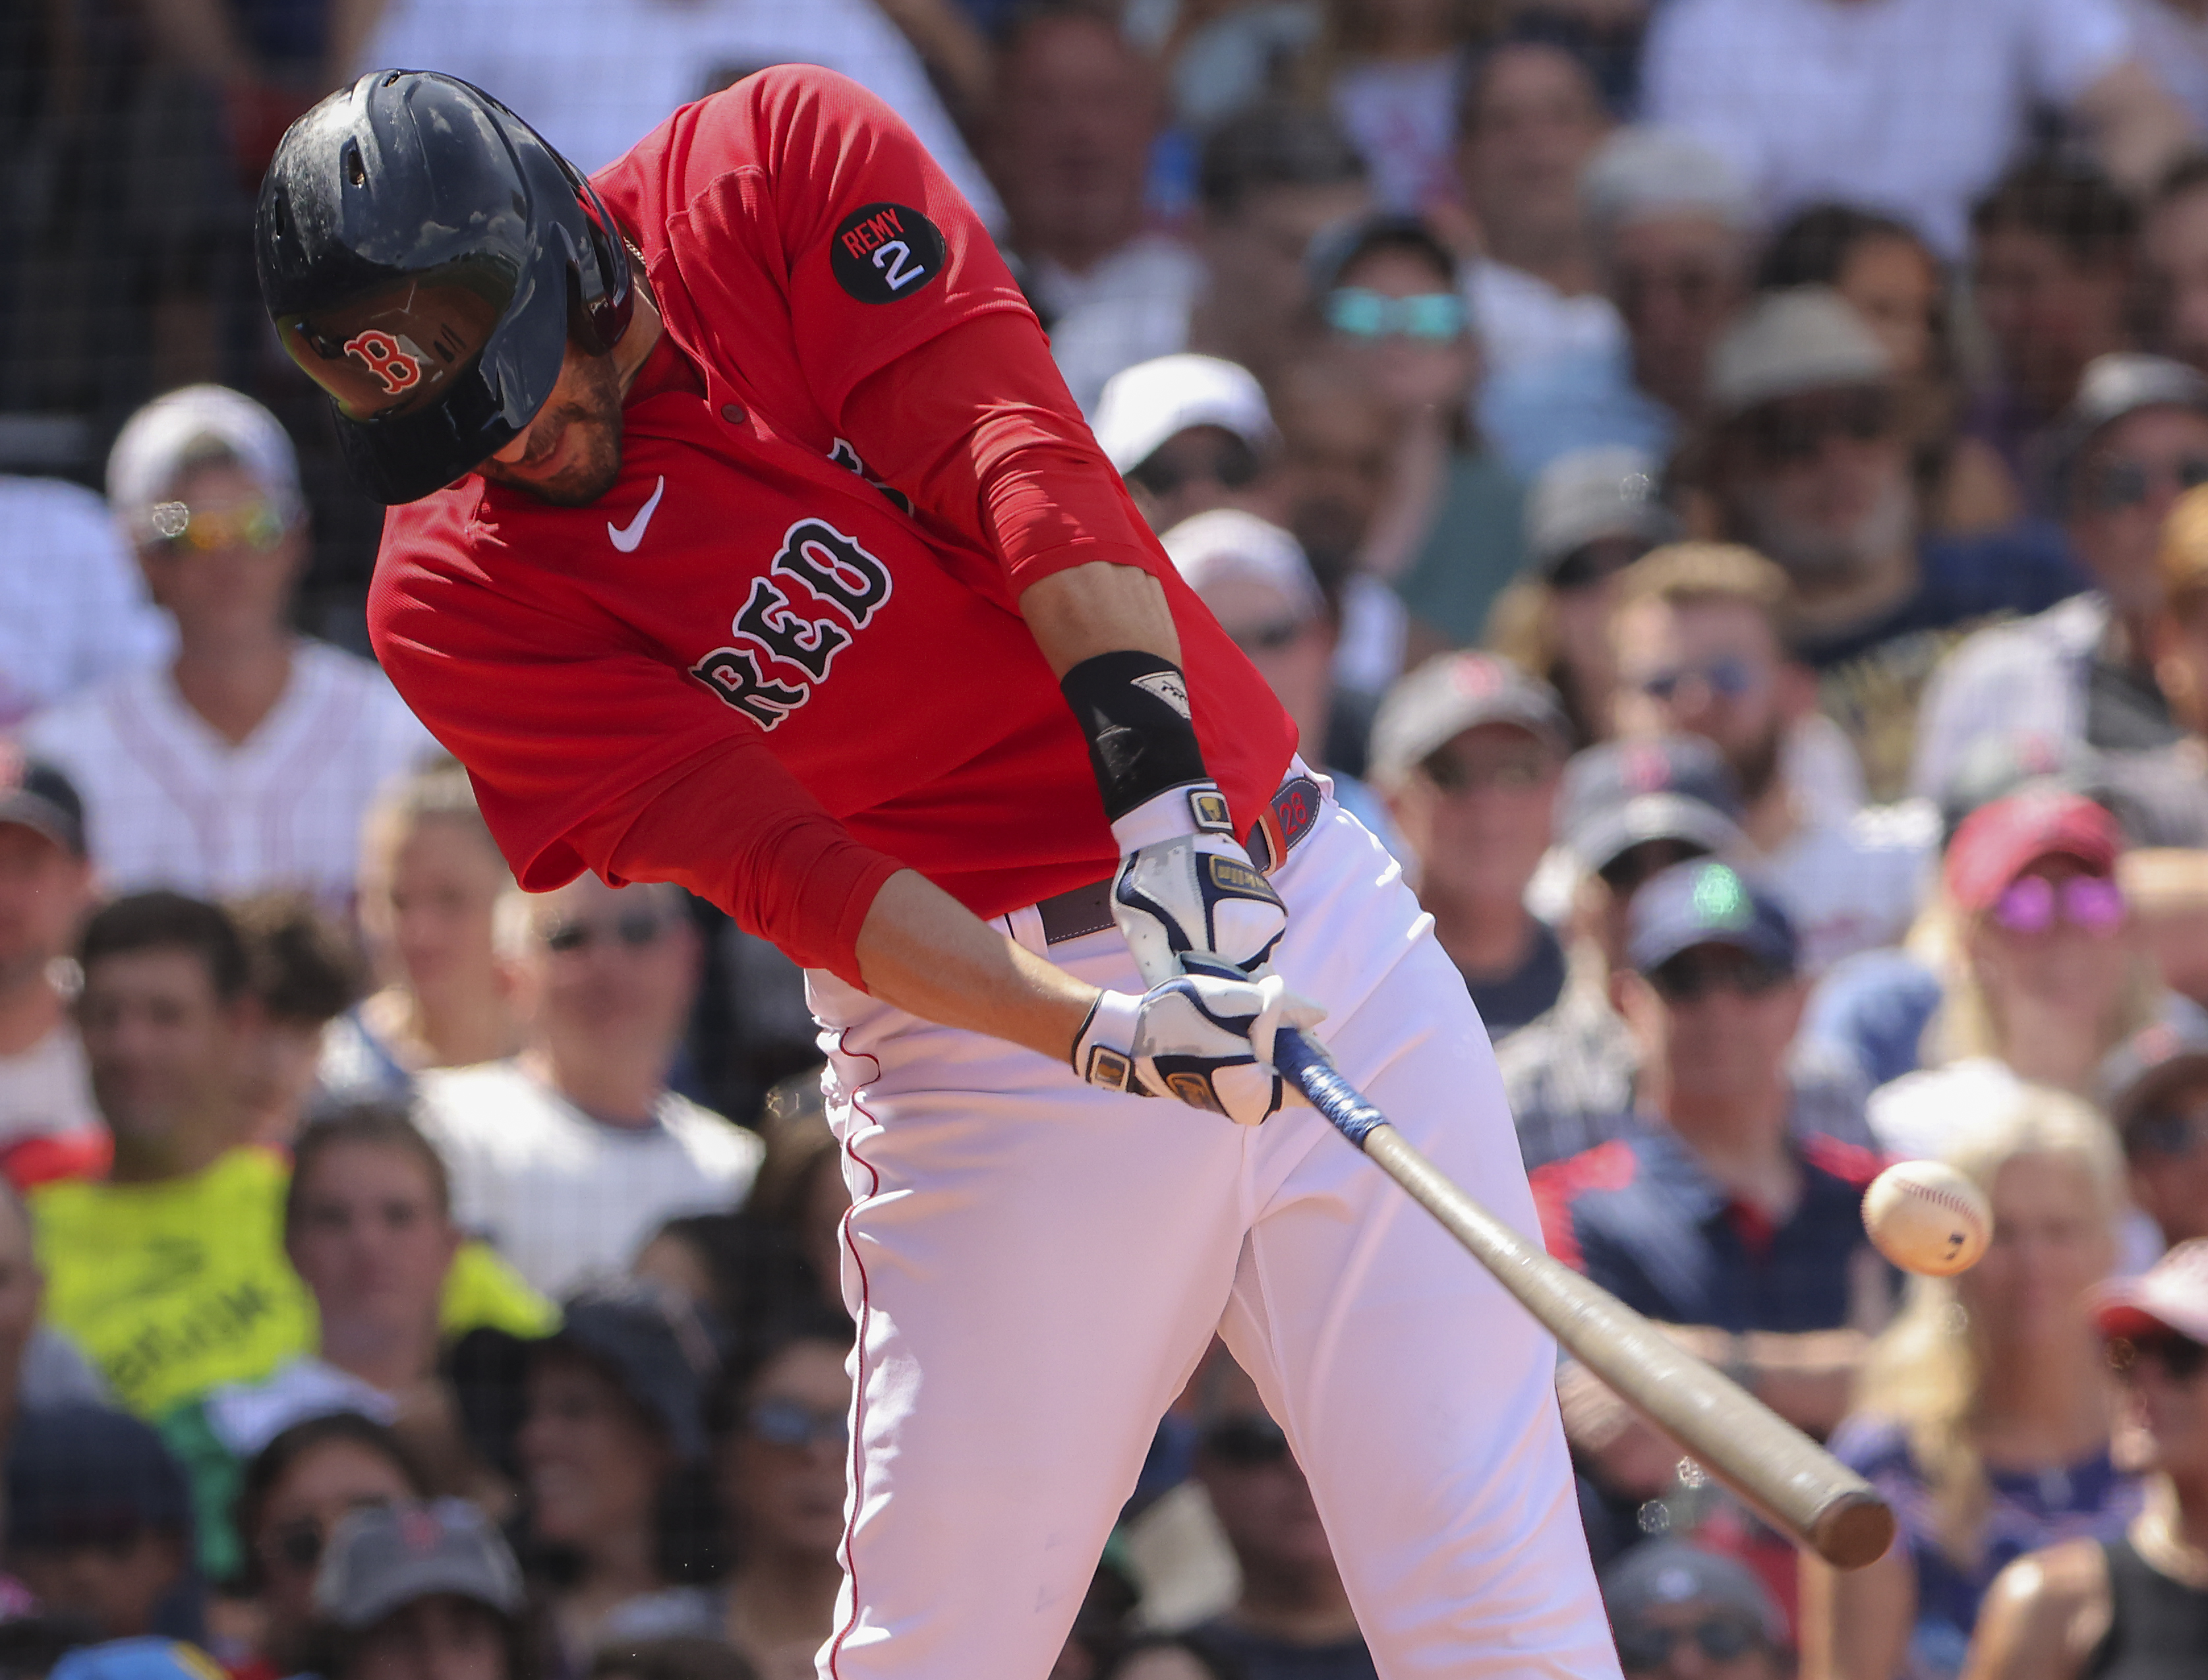 Report: J.D. Martinez signs $18.5 million, 2-year extension with